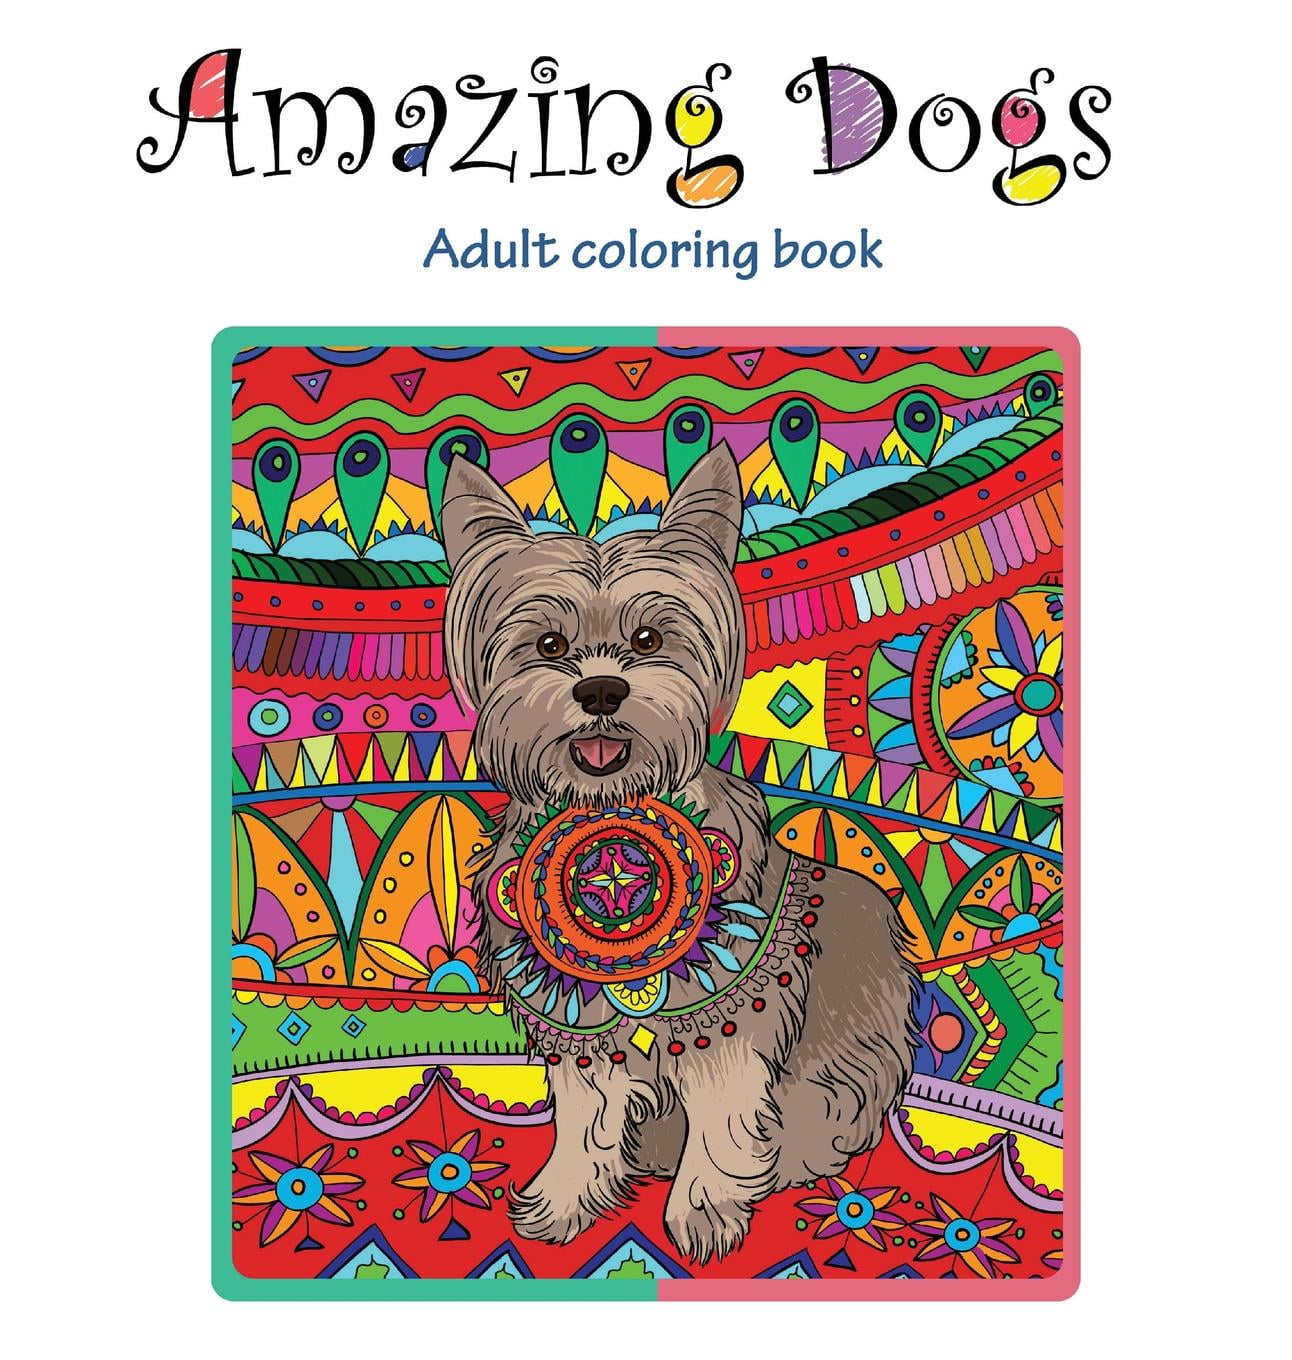 Download Amazing Dogs: Adult Coloring Book (Hardcover) - Walmart ...